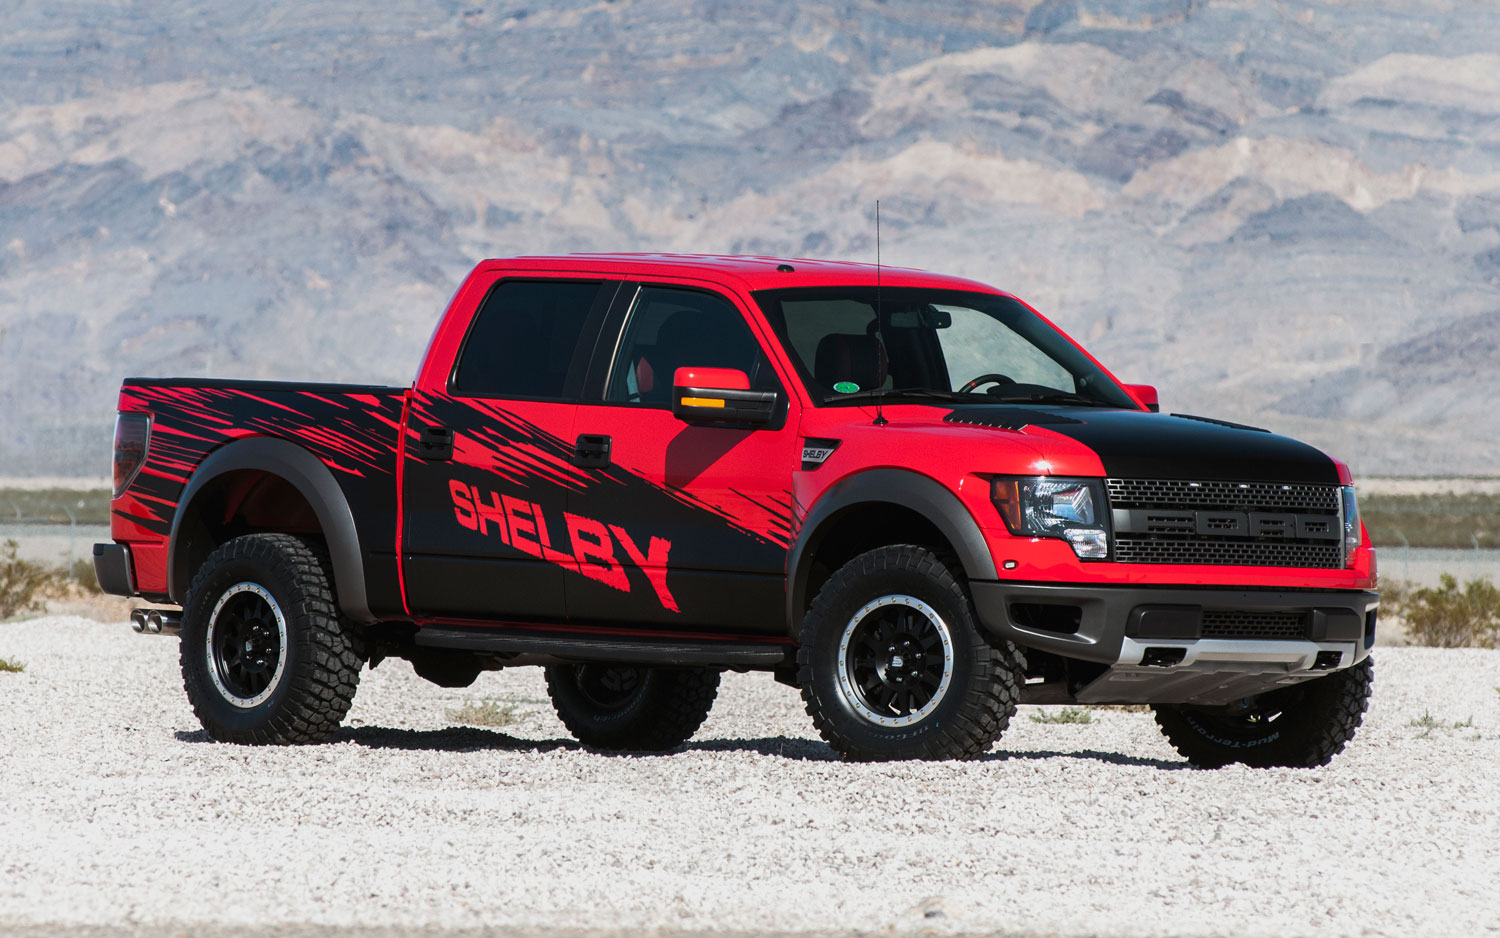 Ford Shelby Raptor Backgrounds, Compatible - PC, Mobile, Gadgets| 1500x938 px